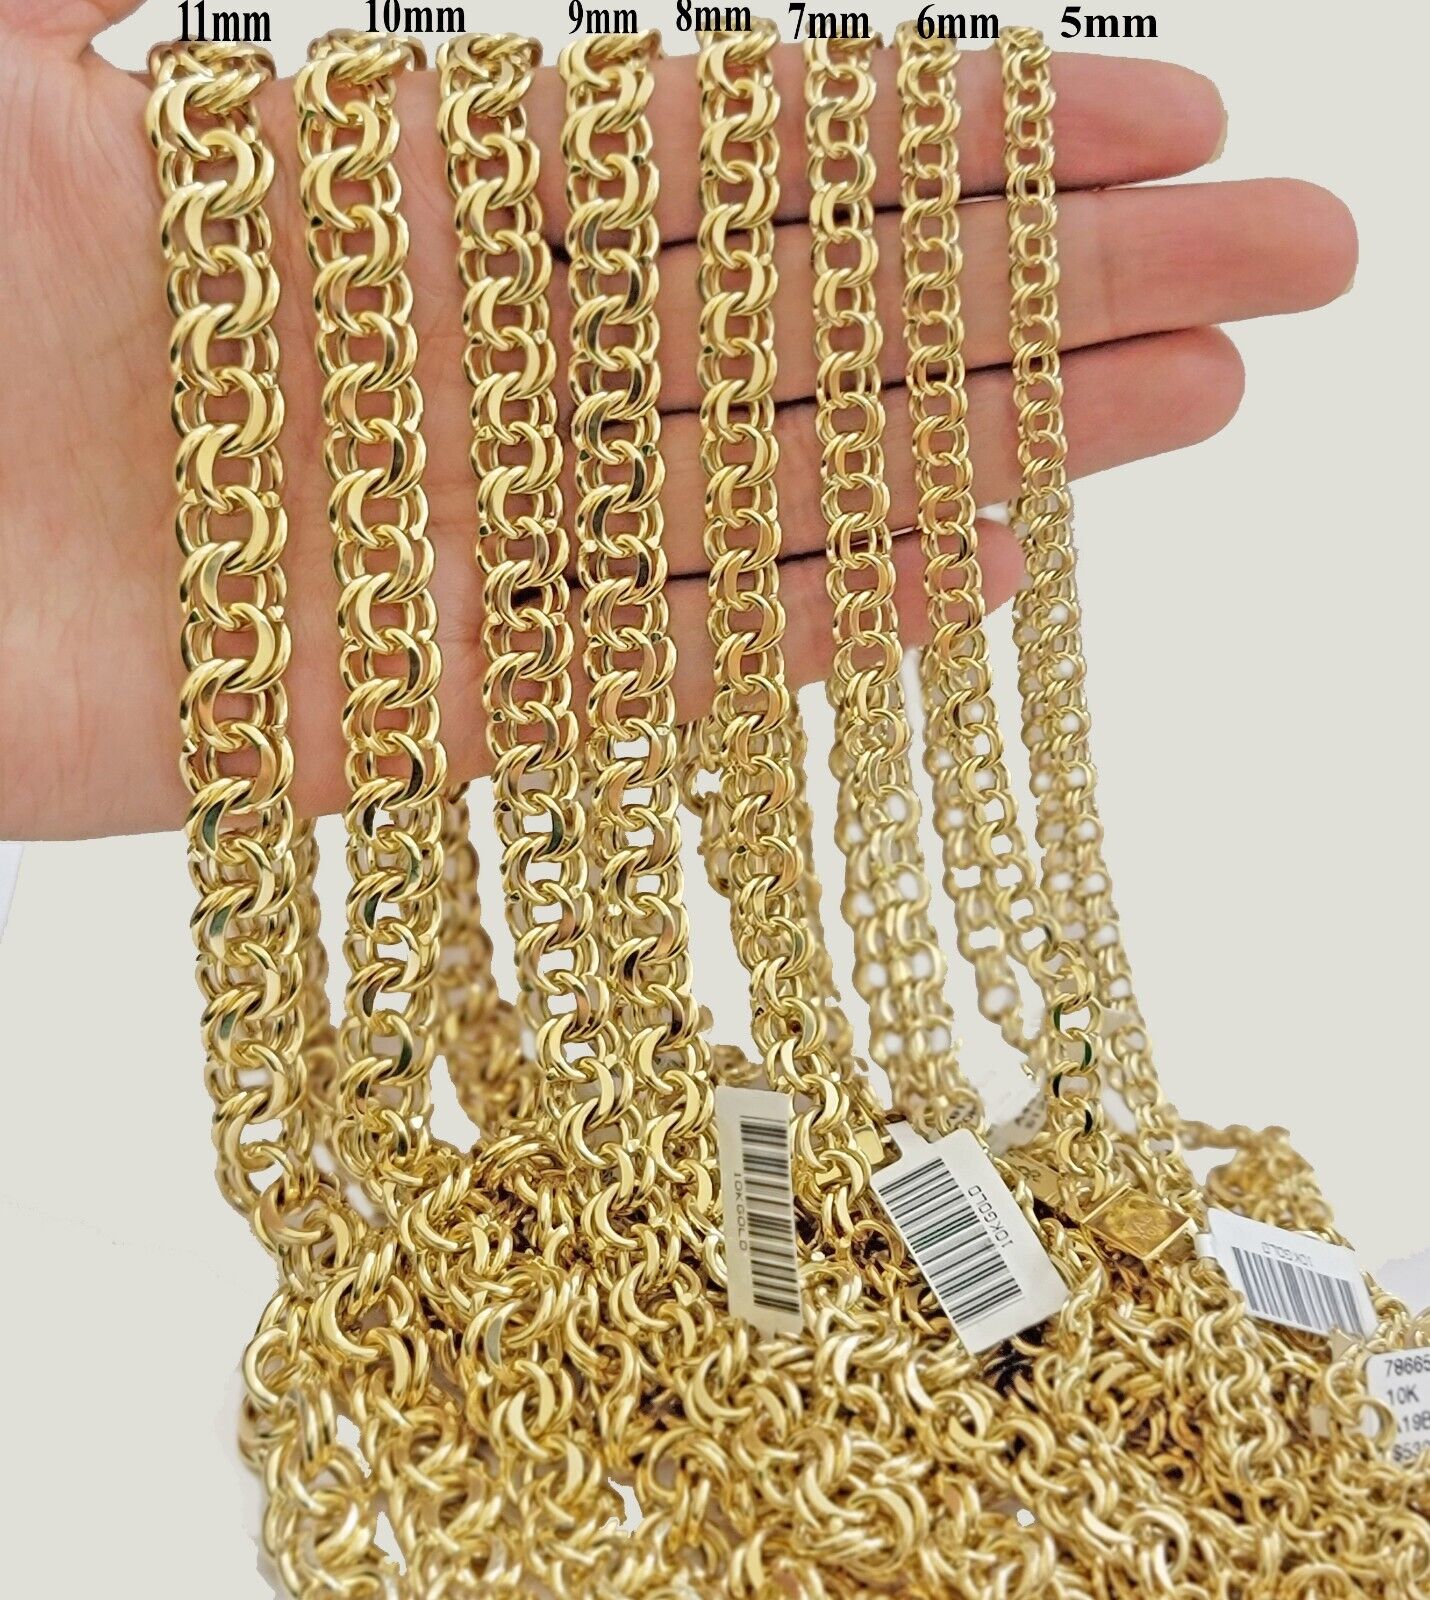 10K Gold Chain Necklace